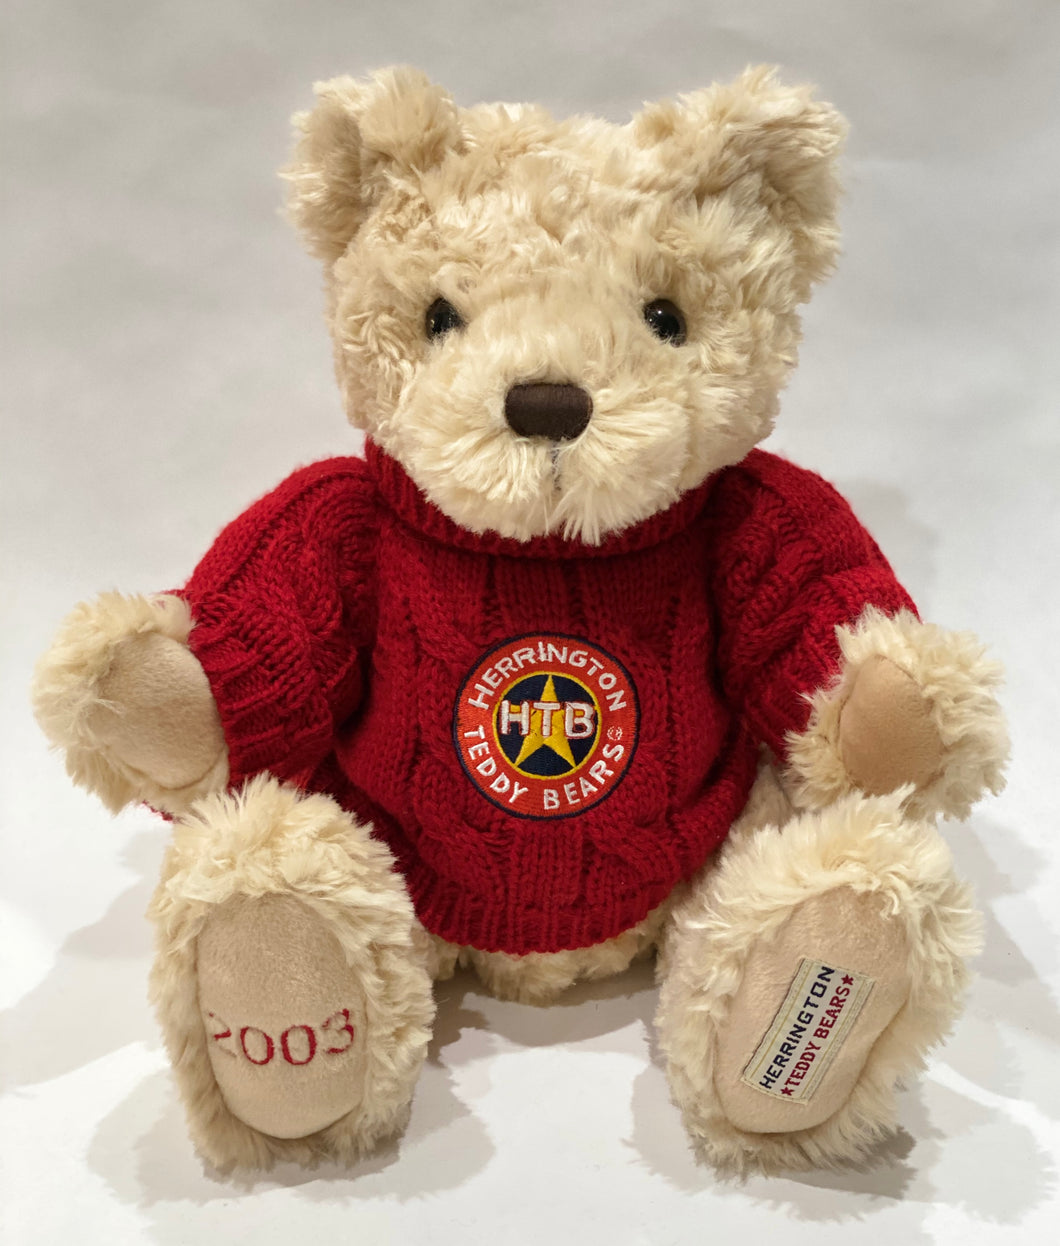 2003 HTB Holiday Teddy Bear-Treasures from the Archives